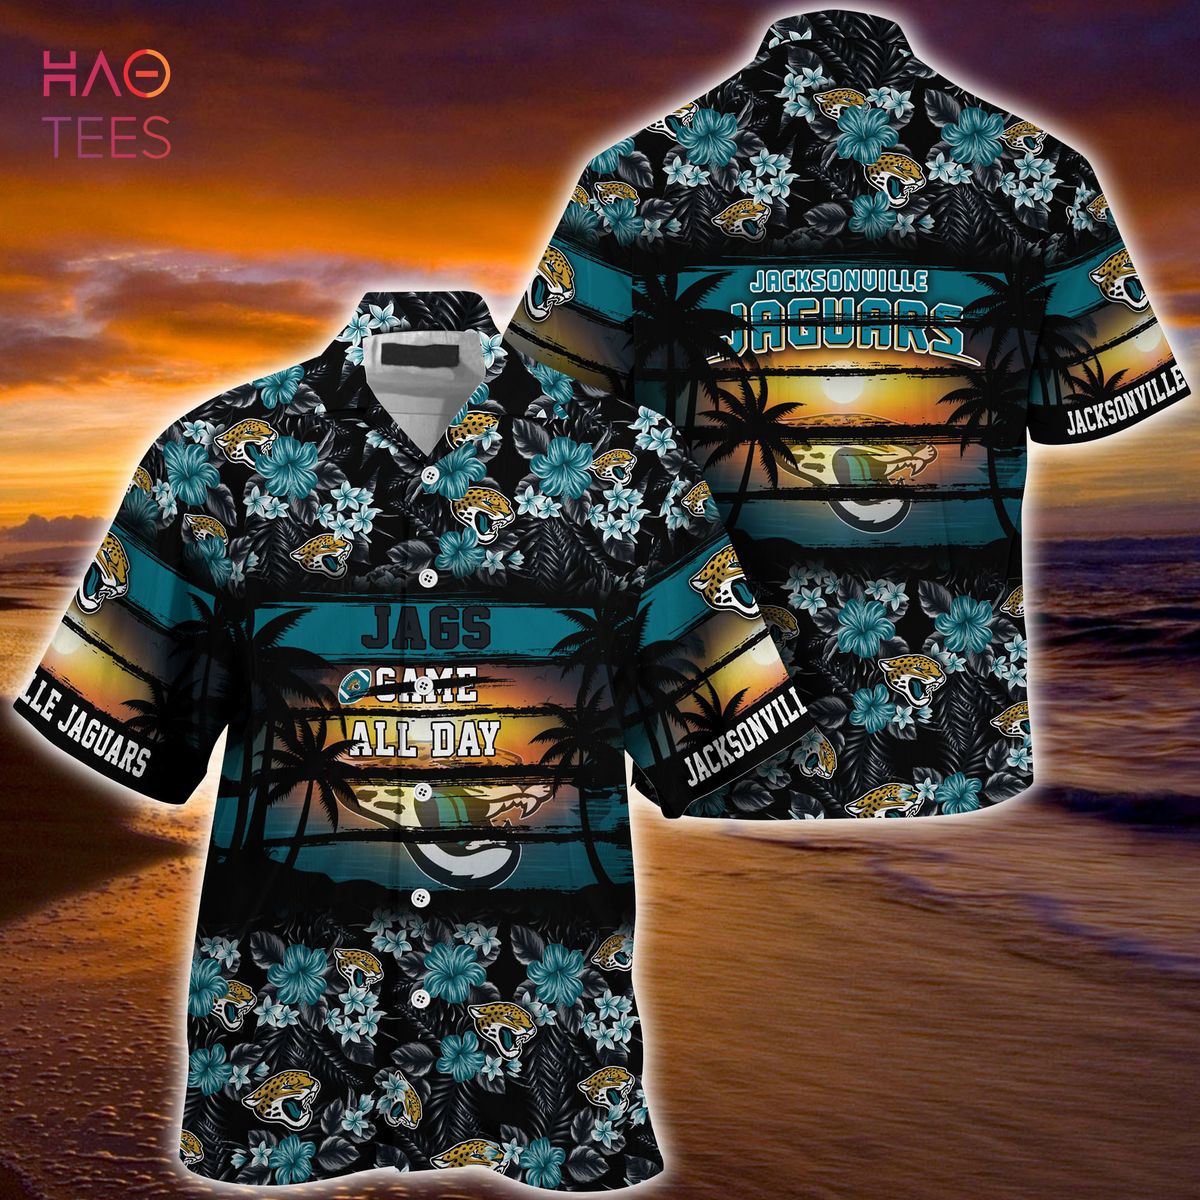 [TRENDING] Jacksonville Jaguars NFL-Summer Hawaiian Shirt, Floral Pattern For Sports Enthusiast This Year